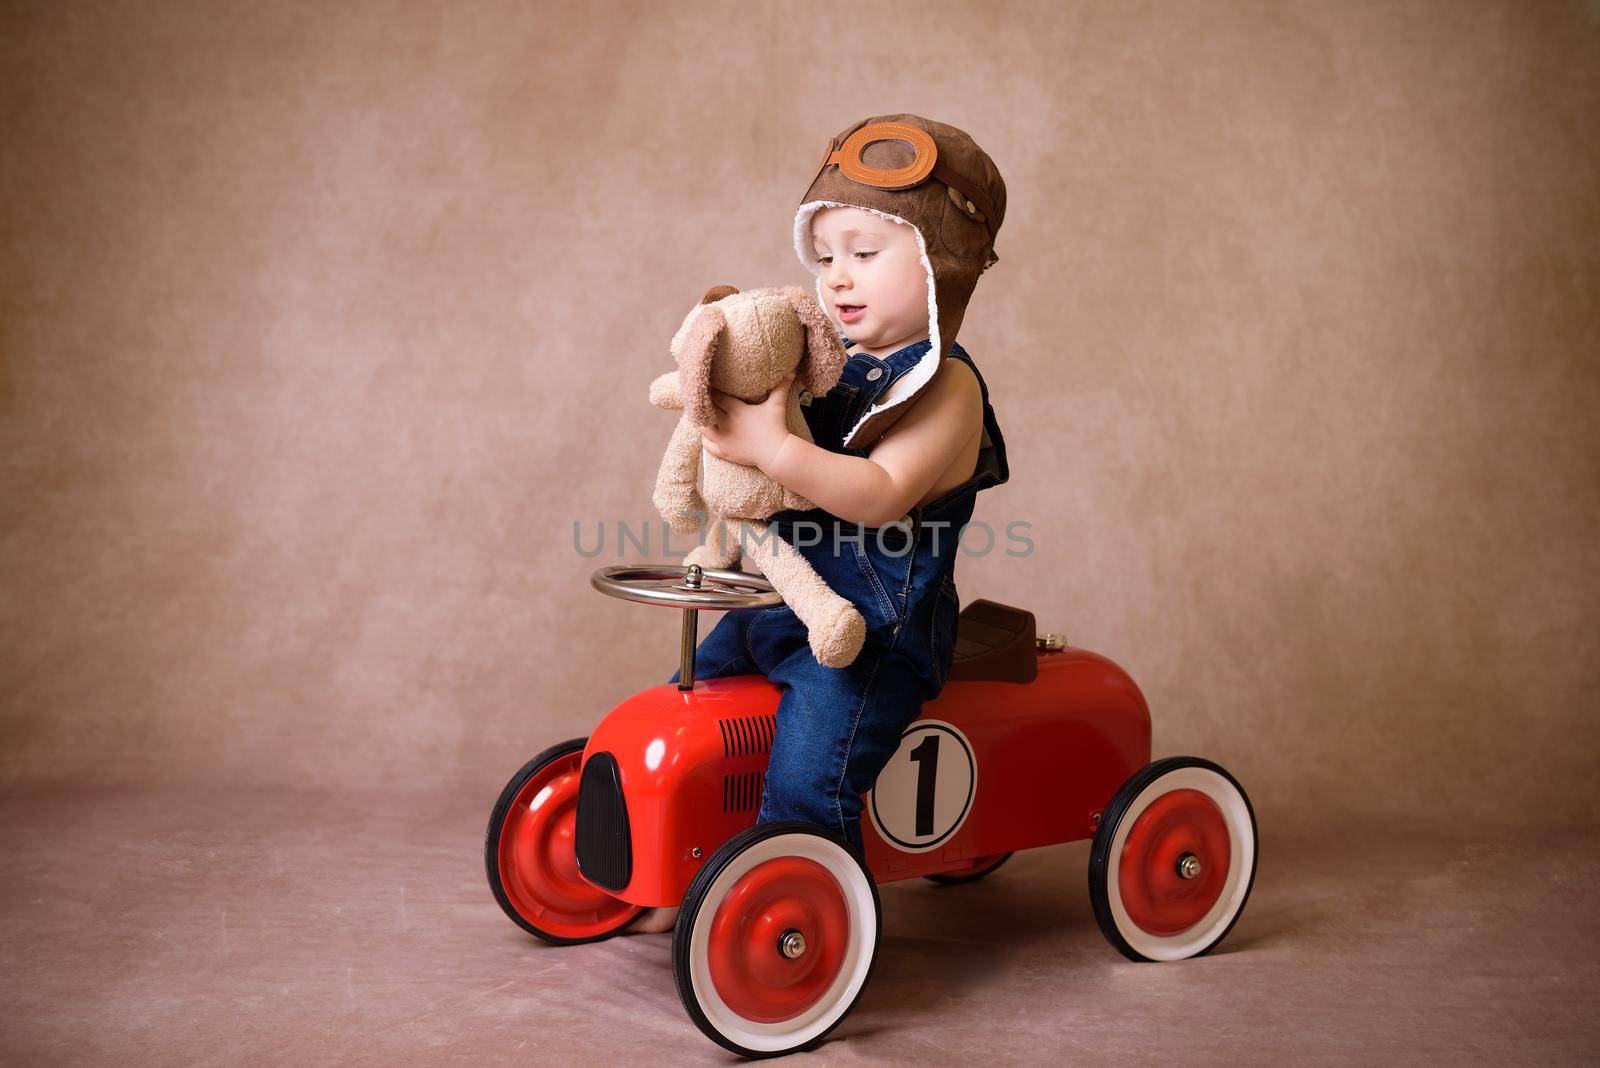 Child riding in red car. Kid holding Christmas bag. Xmas holiday concept by jcdiazhidalgo